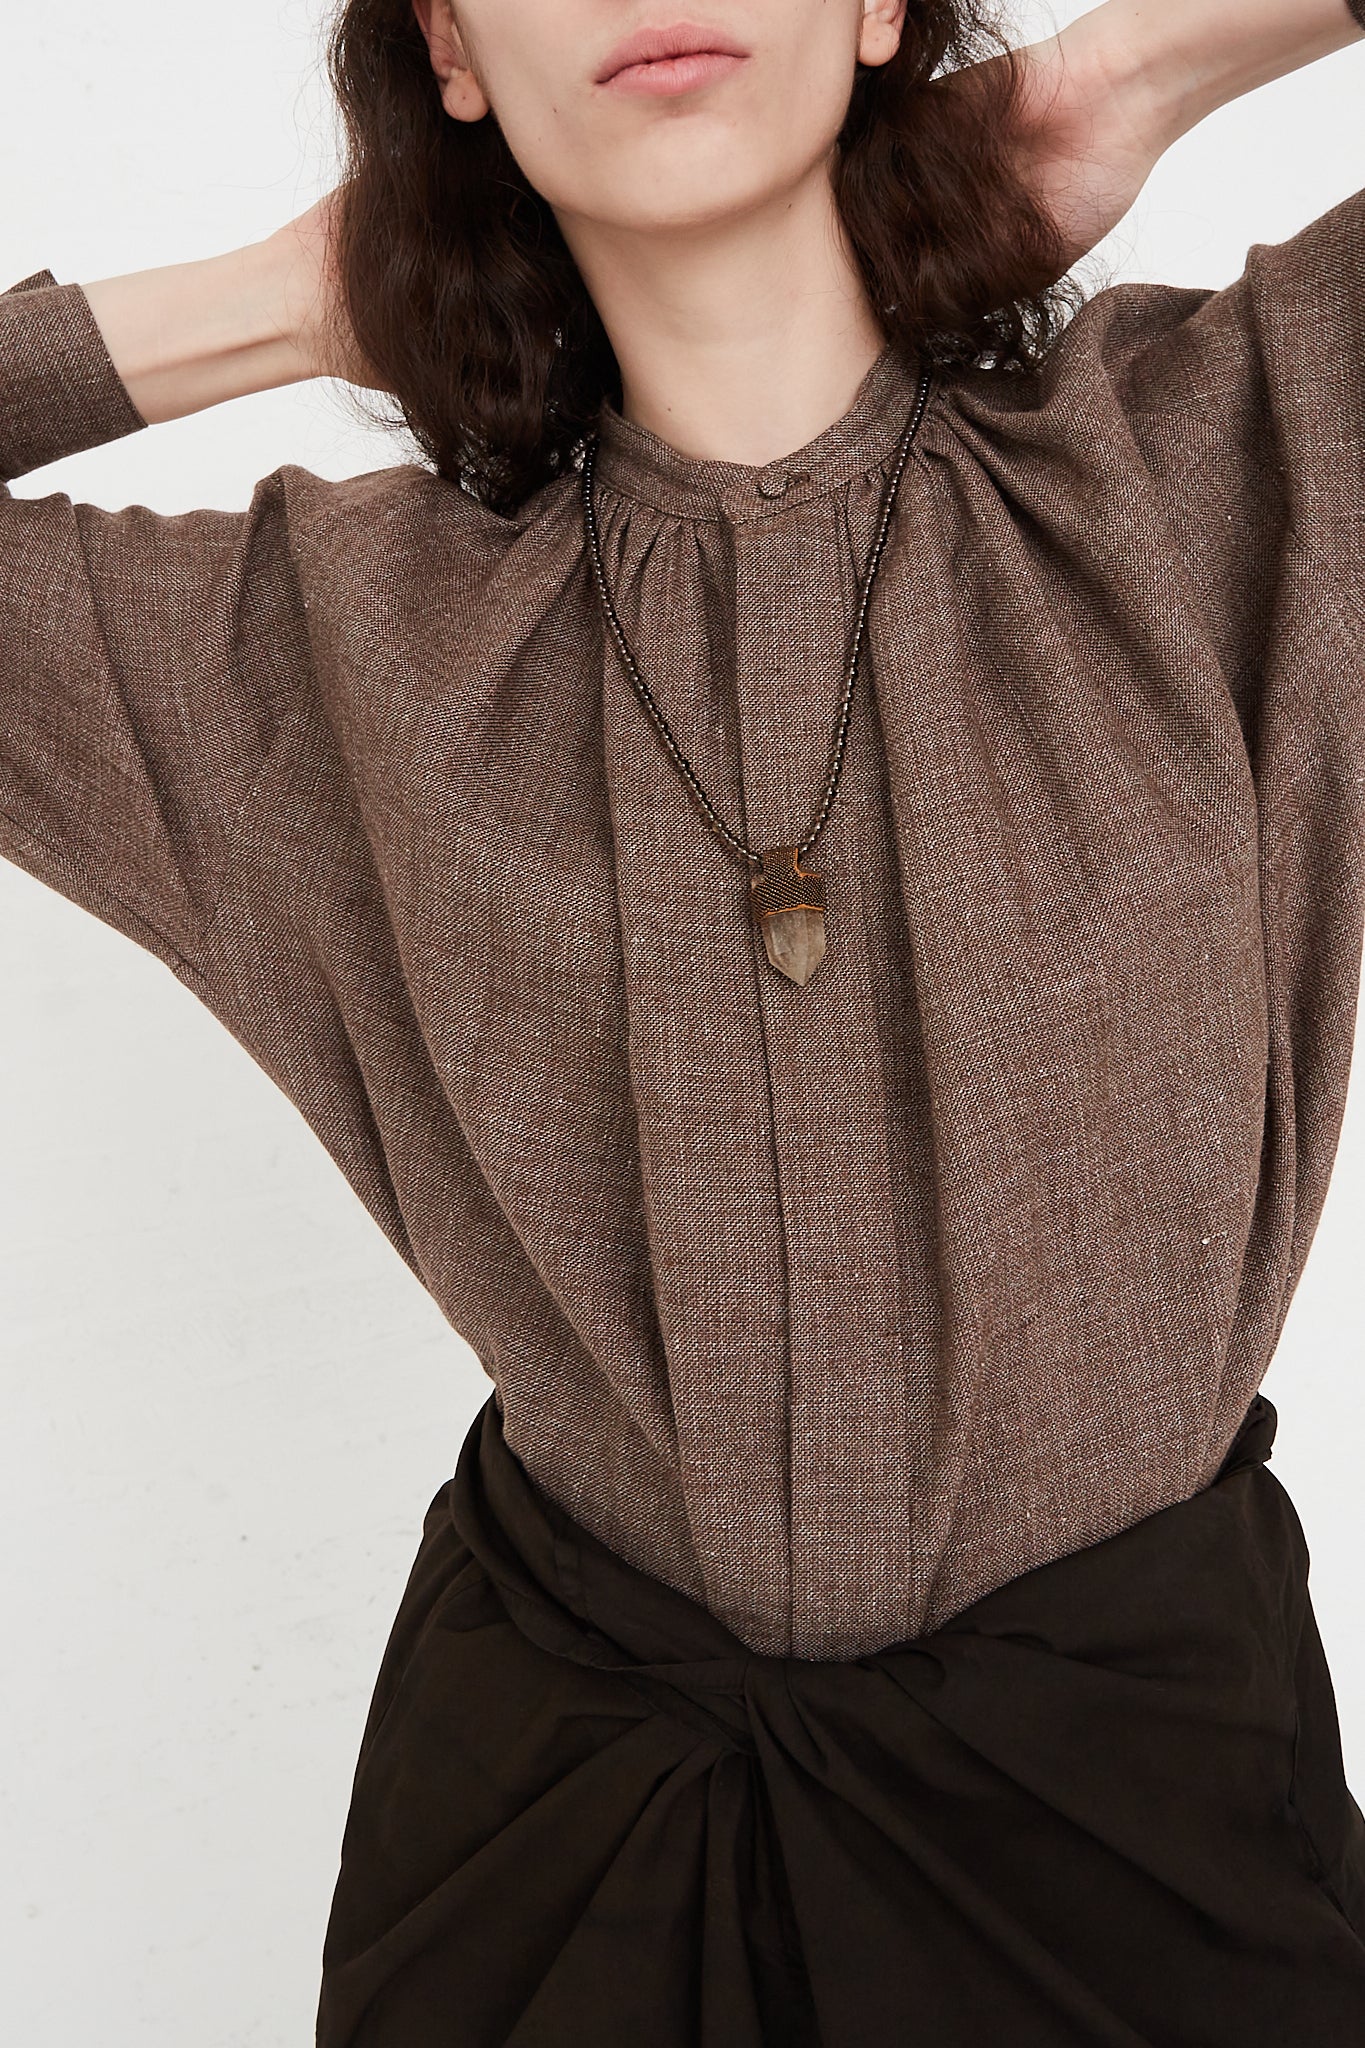 A woman wearing a brown shirt and black skirt adorned with the Robin Mollicone Long Pendulum Necklace in Smoky Quartz Beads Brown, Citrine Crystal.